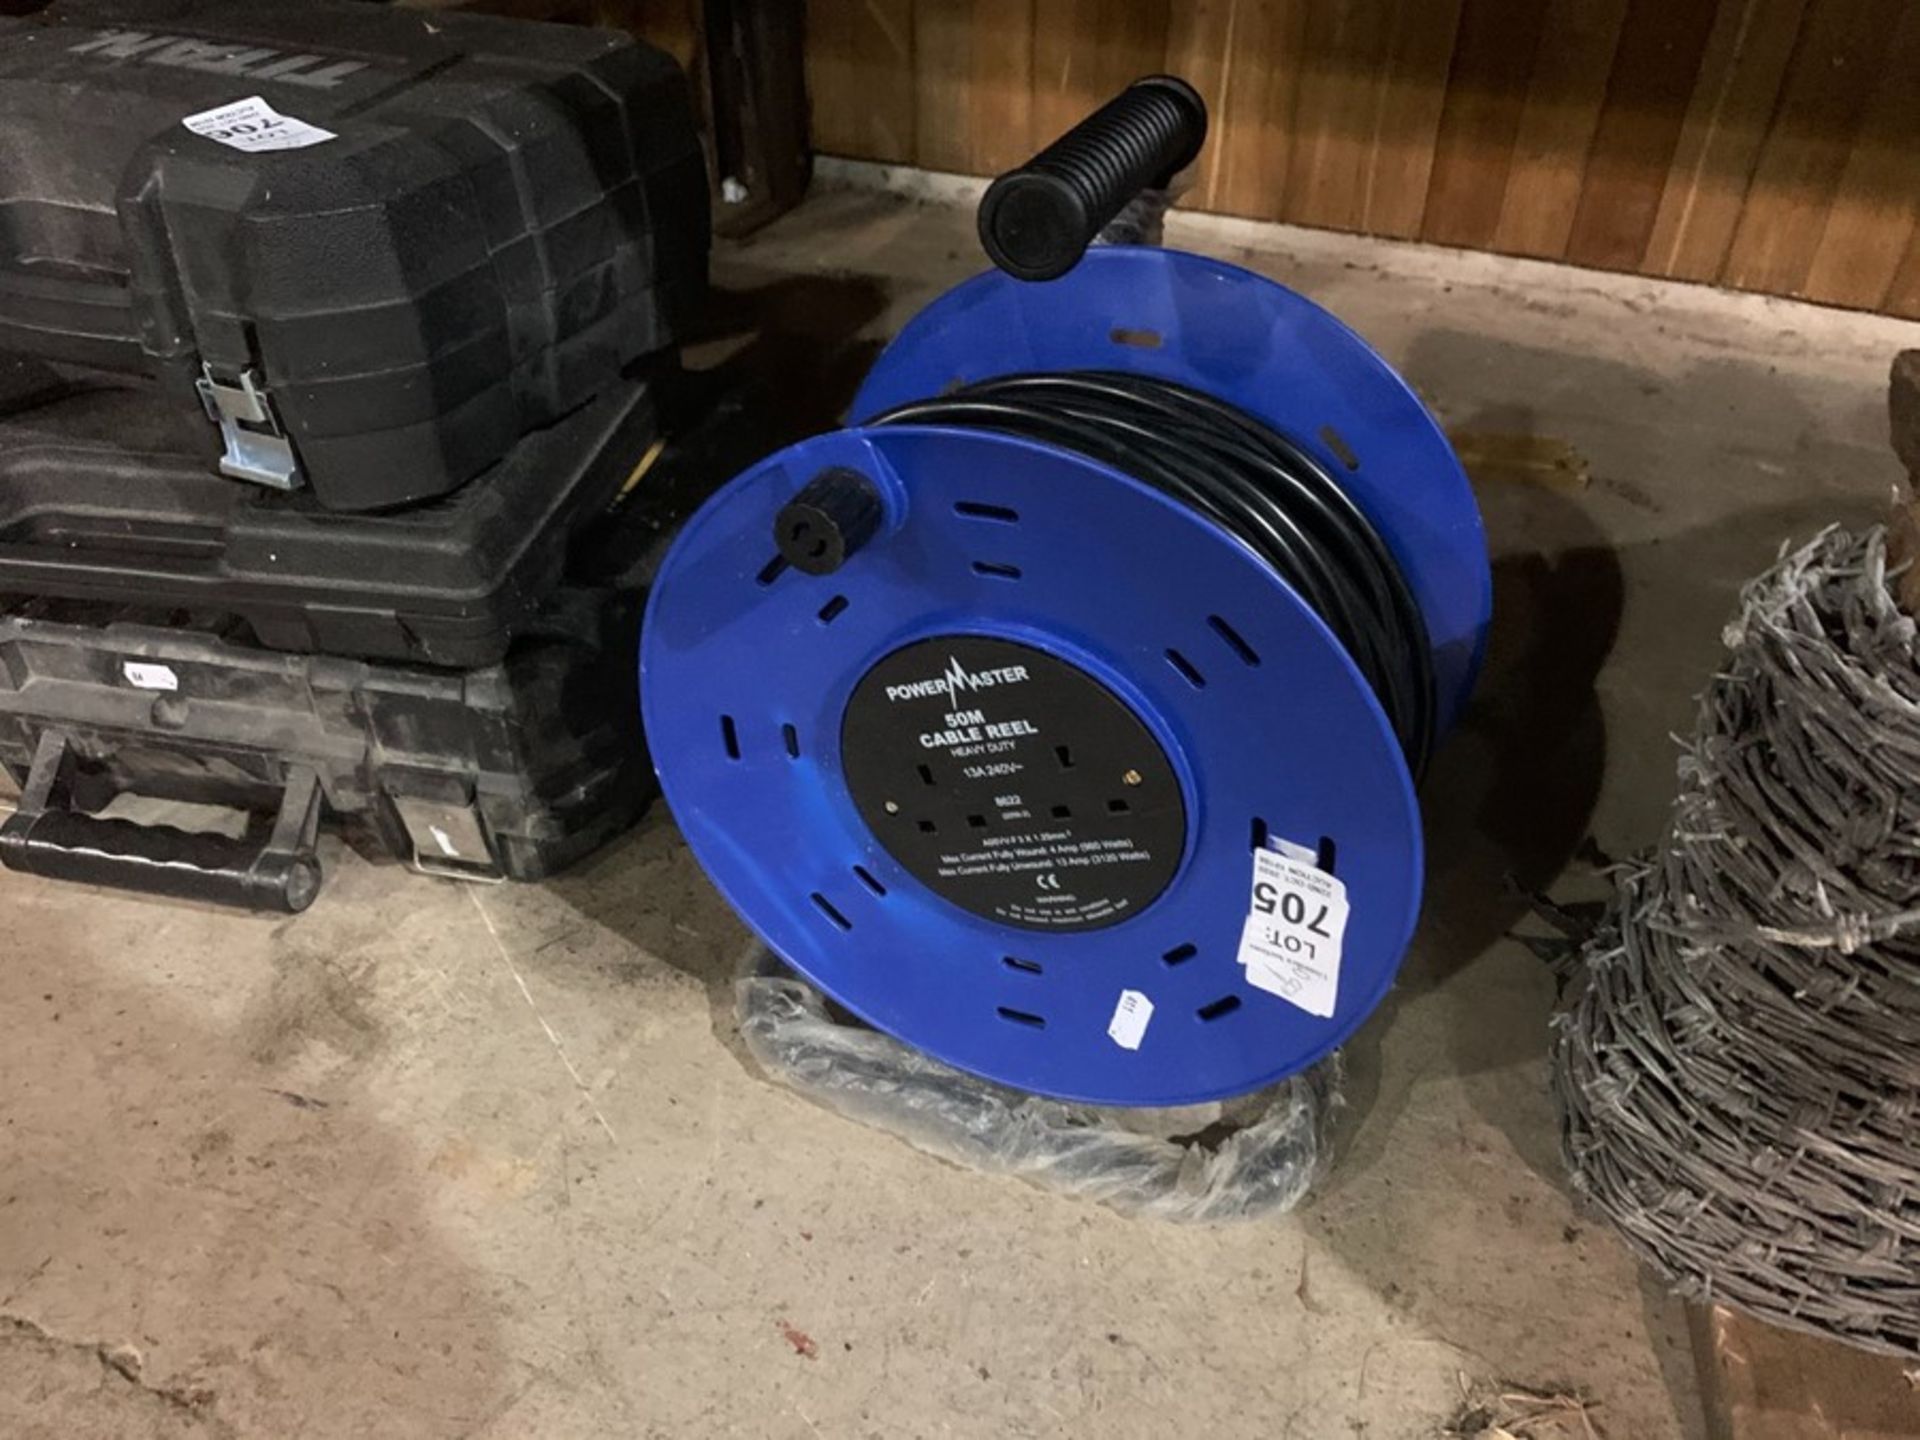 NEW 50M POWERMASTER CABLE EXTENSION REEL - Image 4 of 4